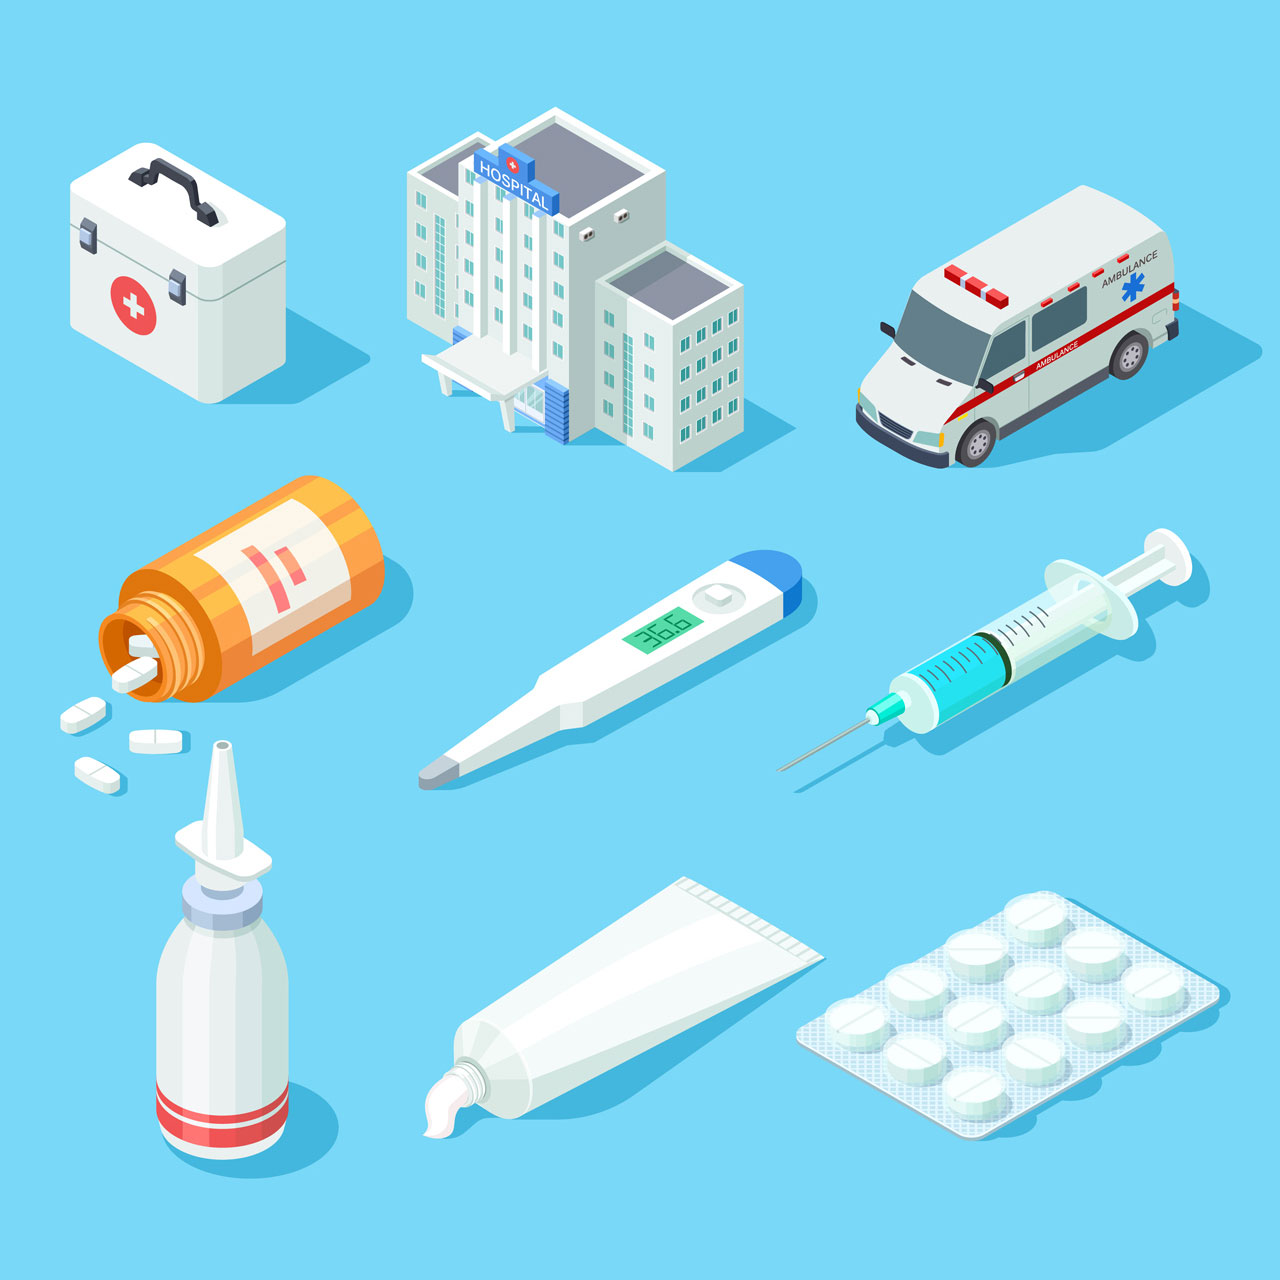 First aid kit medical pharmacy oral spray medicines pills ambulance car hospital building isometric isolated set